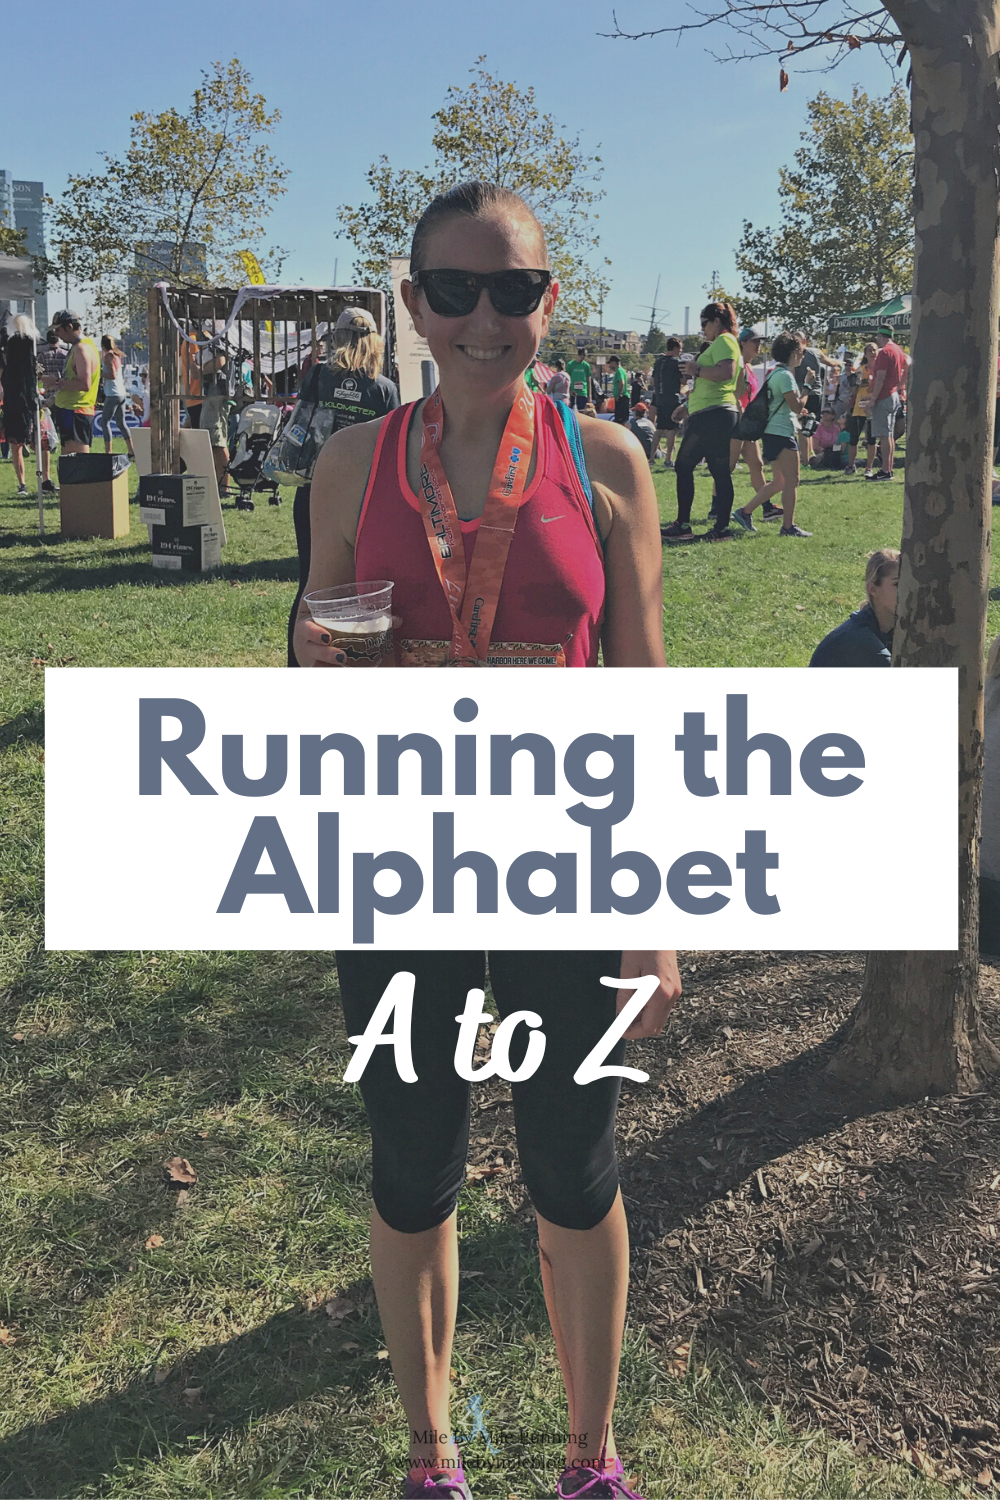 Over the past few weeks many running bloggers have been sharing the places they have run or raced from A to Z. This got me thinking about all the places I have run over the years. We used to travel quite a bit, and I've been running for about 20+ years now. For some letters I could come up with a whole bunch of places I've run, while others were a struggle. Check out my recap of running the alphabet from A to Z!